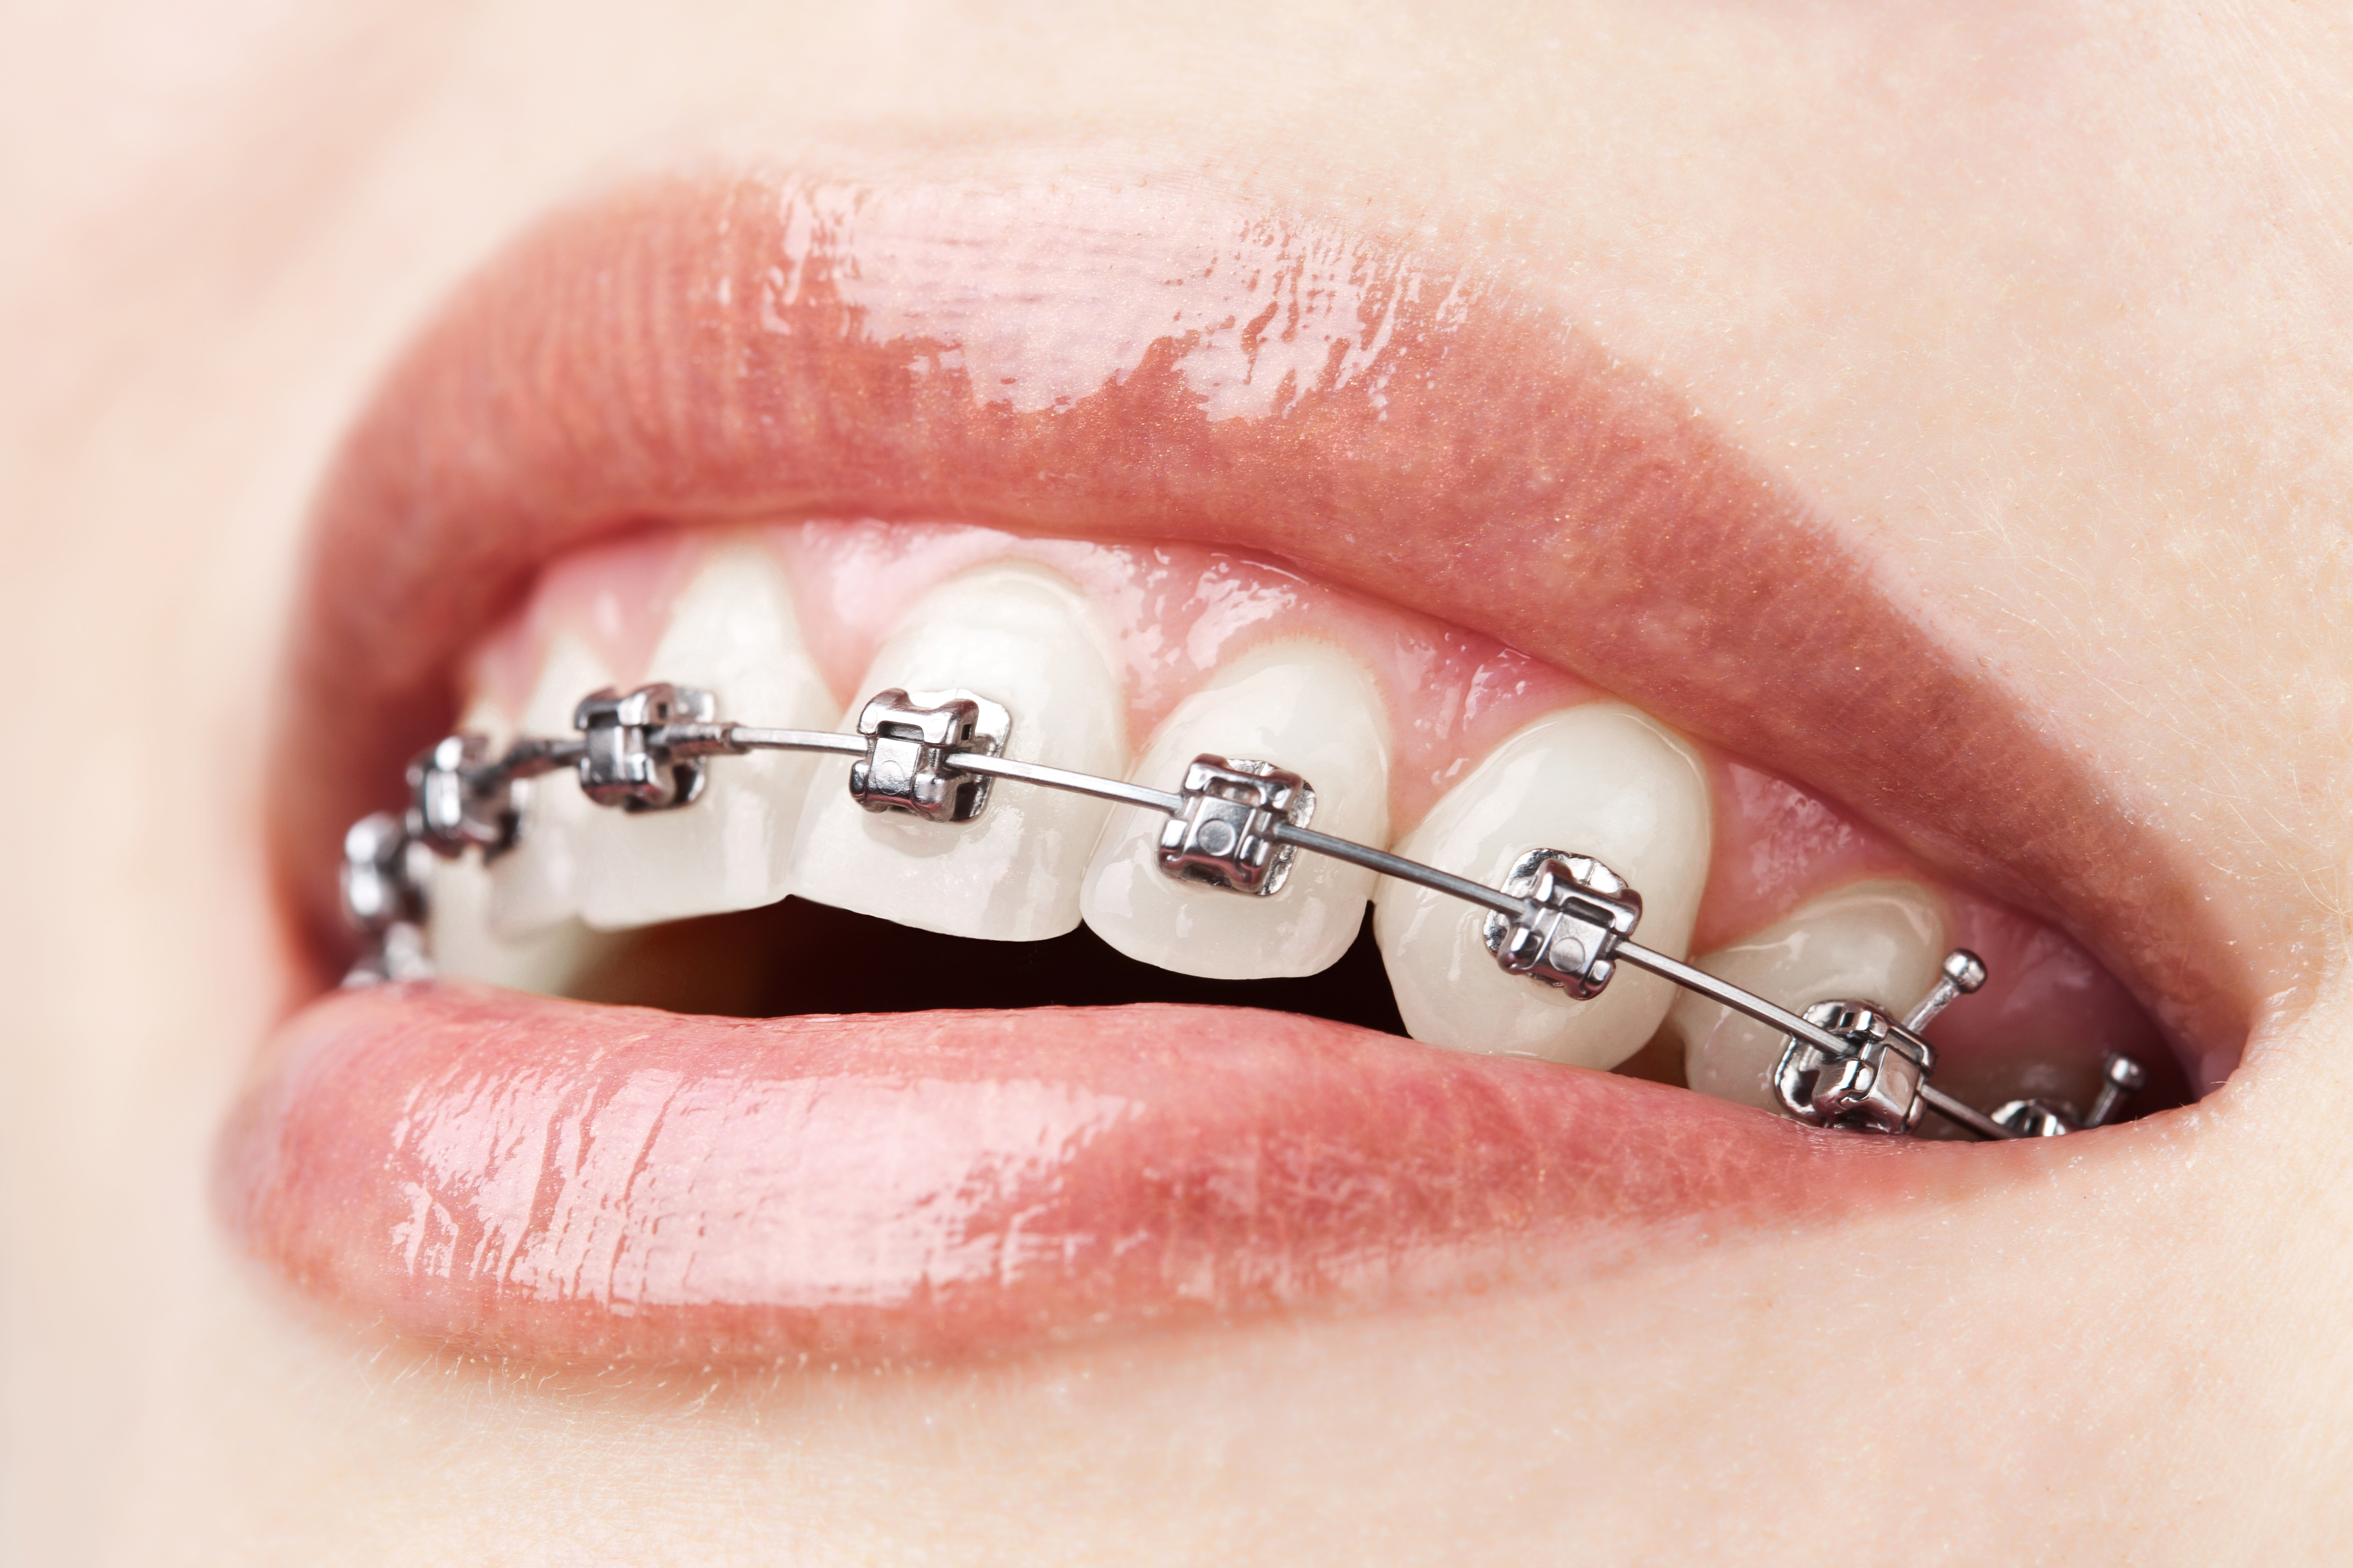 Braces Can Actually Be Bad For Your Teeth